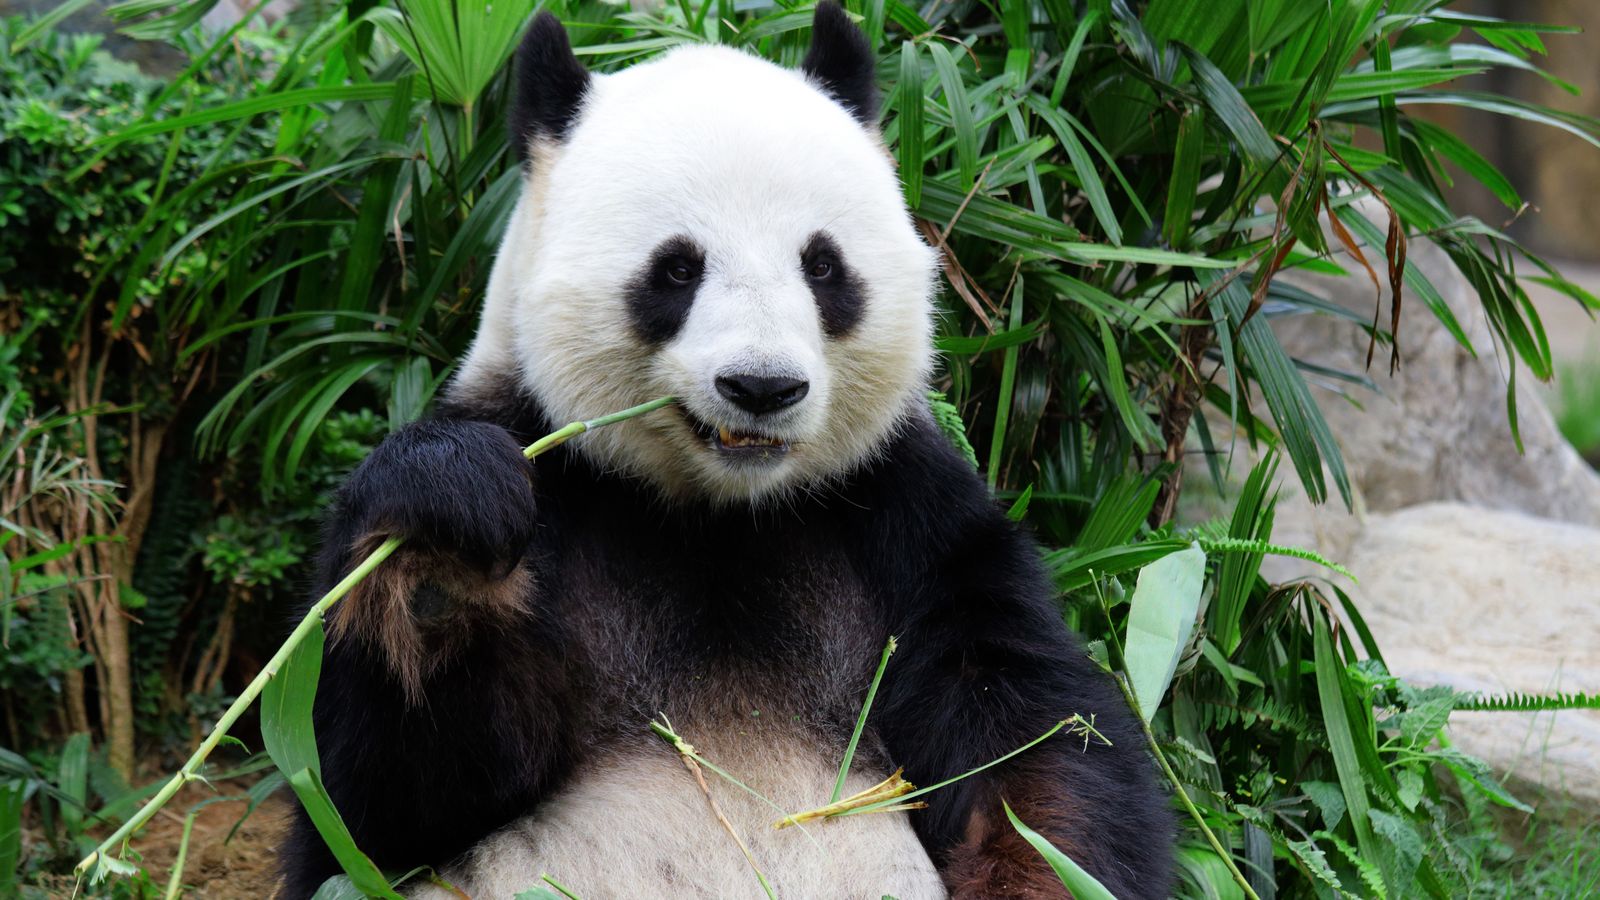 Revealed: Study finds how pandas gain weight on a bamboo diet